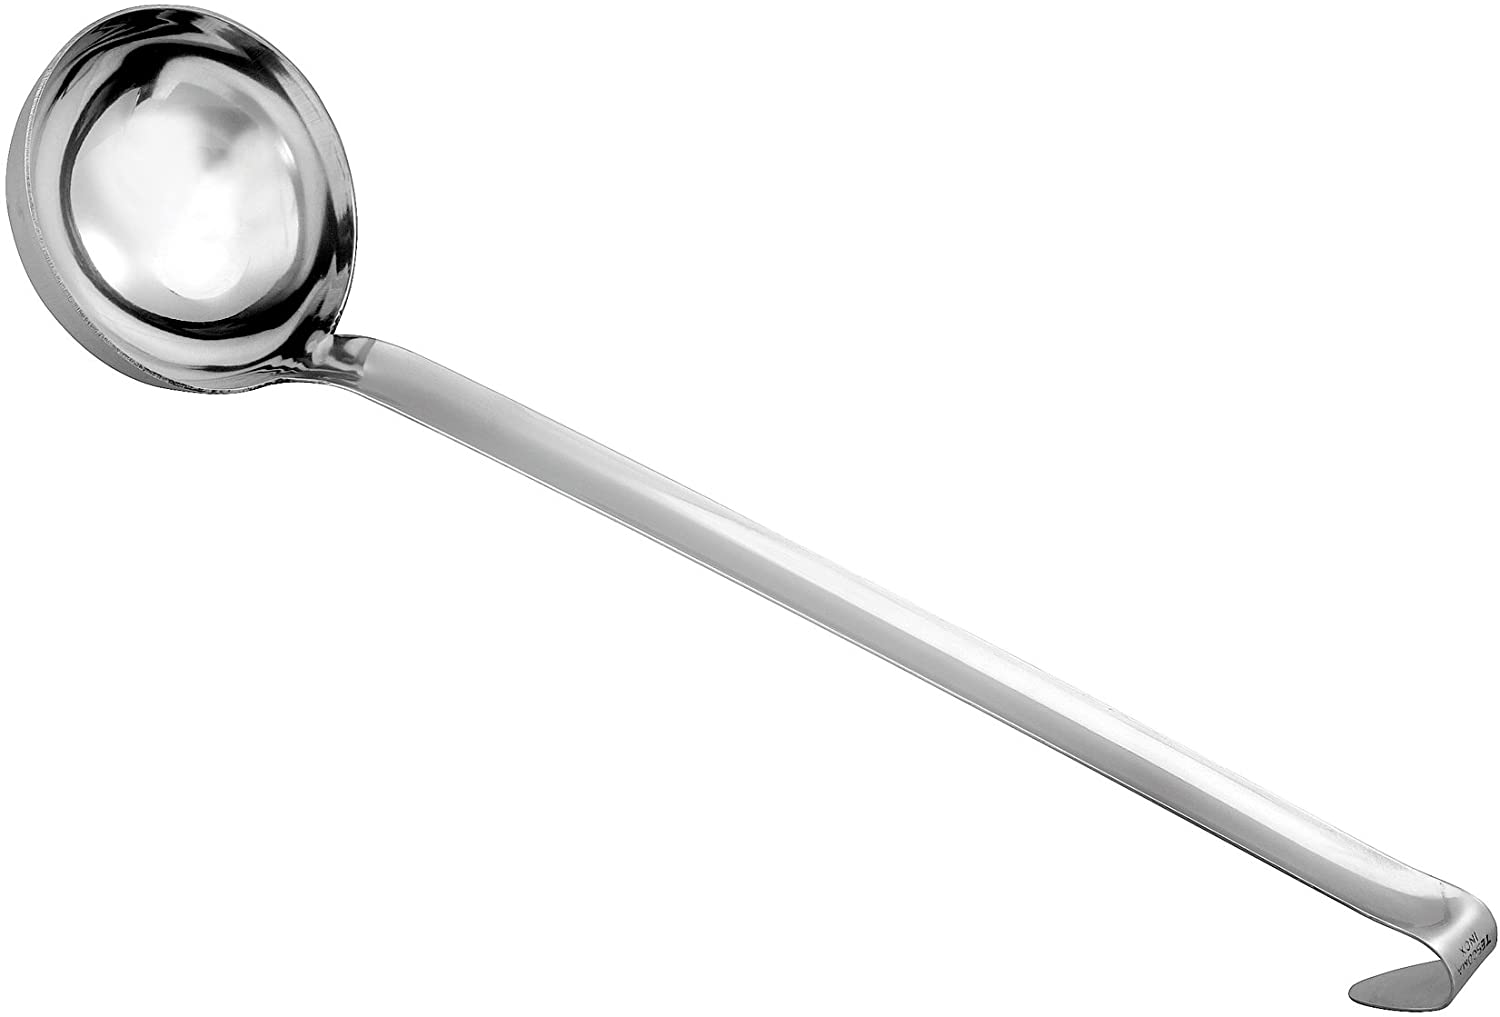 Tescoma 428318 Ladle, Stainless Steel, Grey